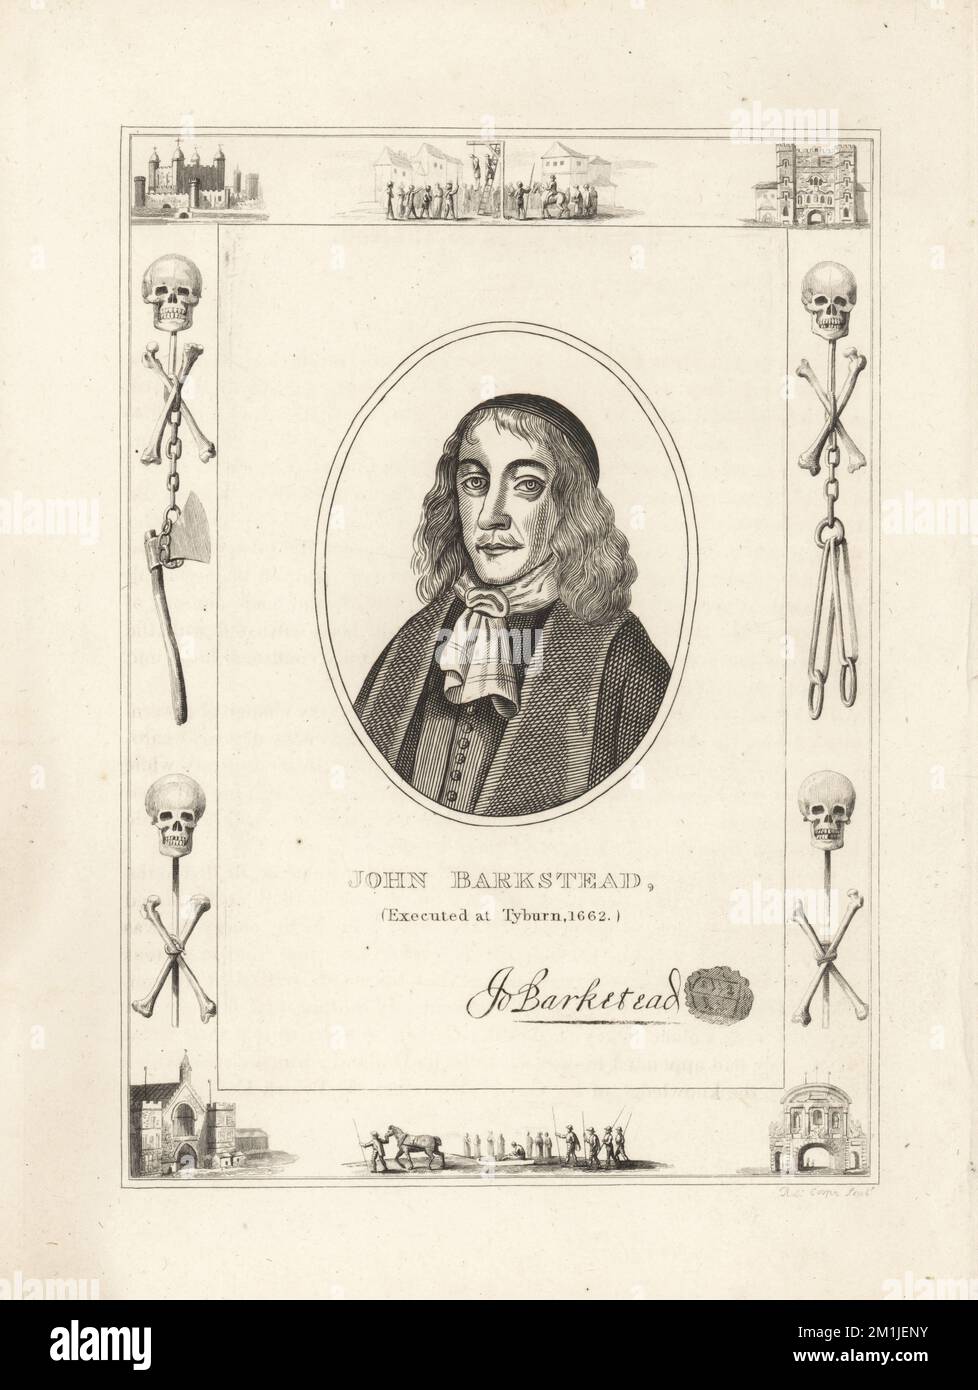 John Bankstead, executed at Tyburn 1662. English major general and regicide of King Charles I, hanged at the restoration. With his autograph and seal. Within a frame decorated with vignettes of skull and cross bones, chains and executioner’s axe, a man hanging from a gibbet at Tyburn, a condemned man on a sled, the Tower of London, Newgate Prison. Copperplate engraving by Robert Cooper from James Caulfield’s The High Court of Justice, London, 1820. Stock Photo